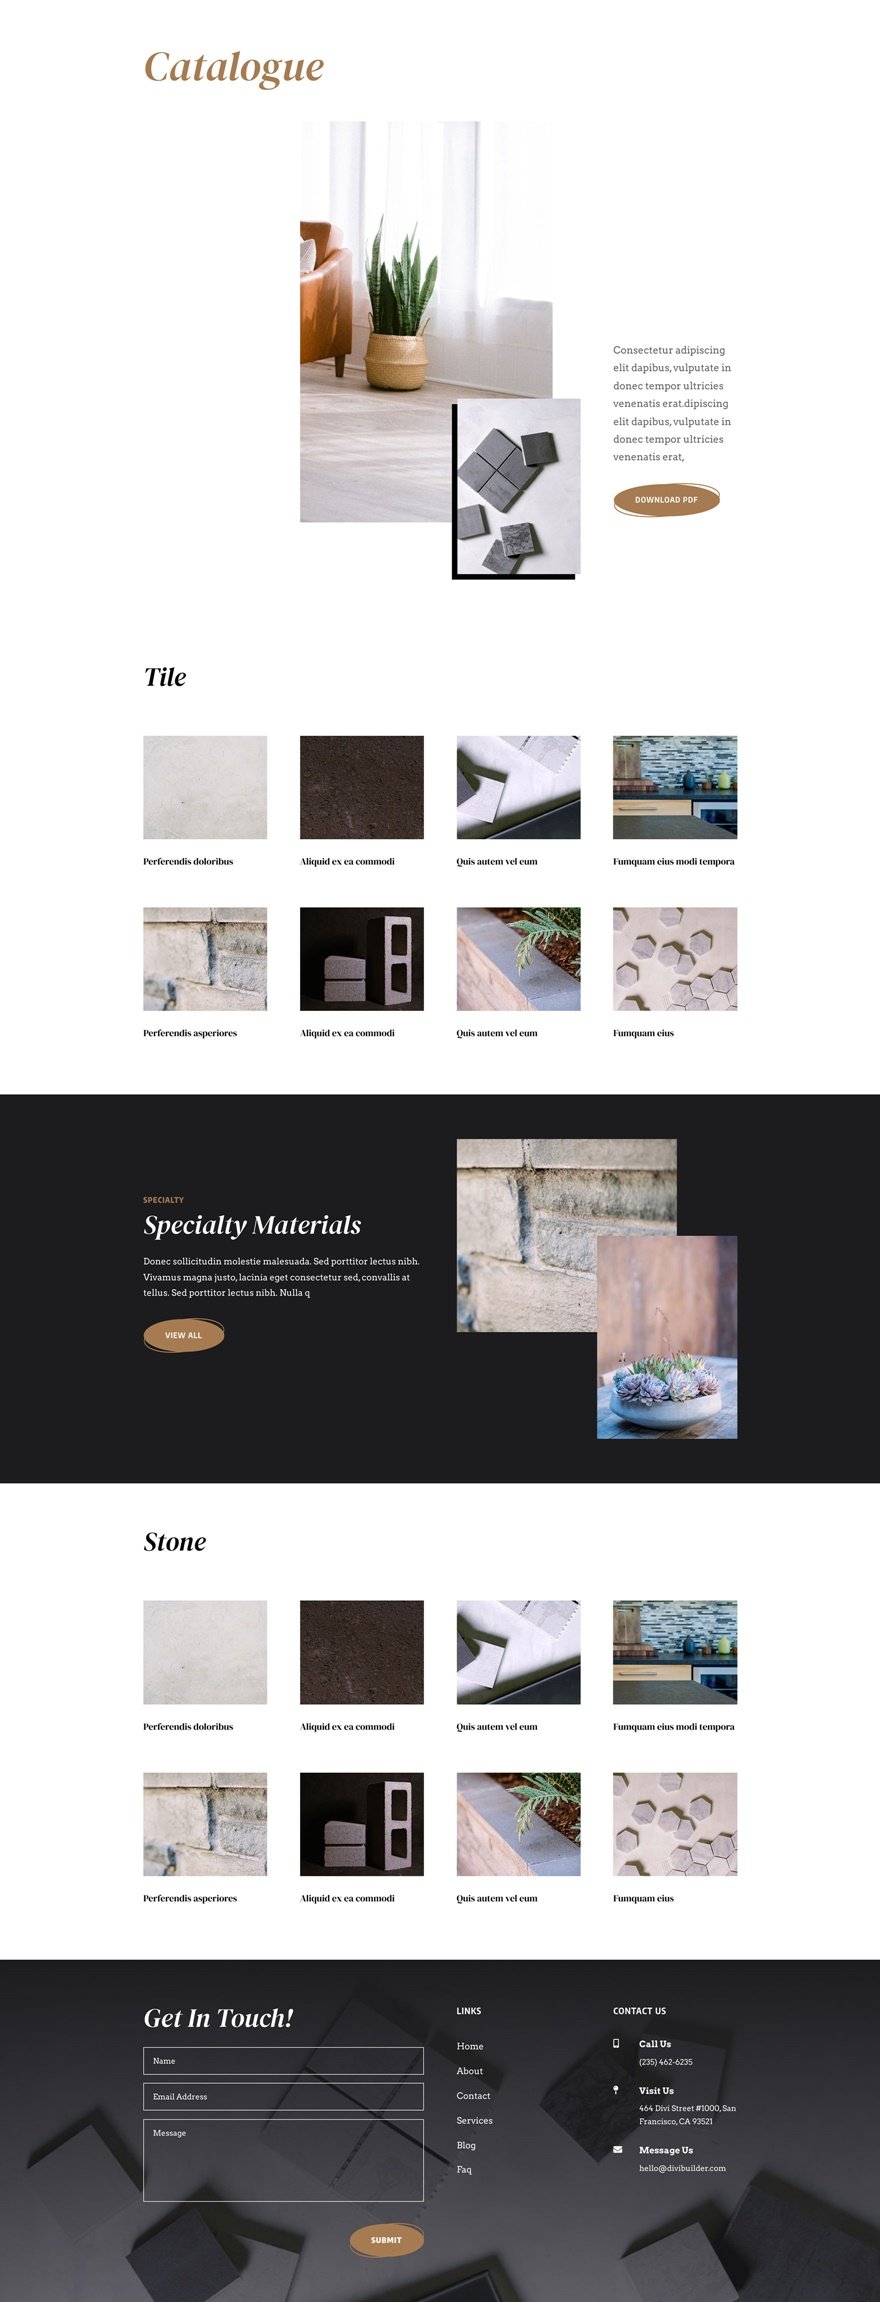 get-a-a-free-stone-factory-layout-pack-for-divi-7 獲得 Divi 的免費 Stone Factory Layout Pack